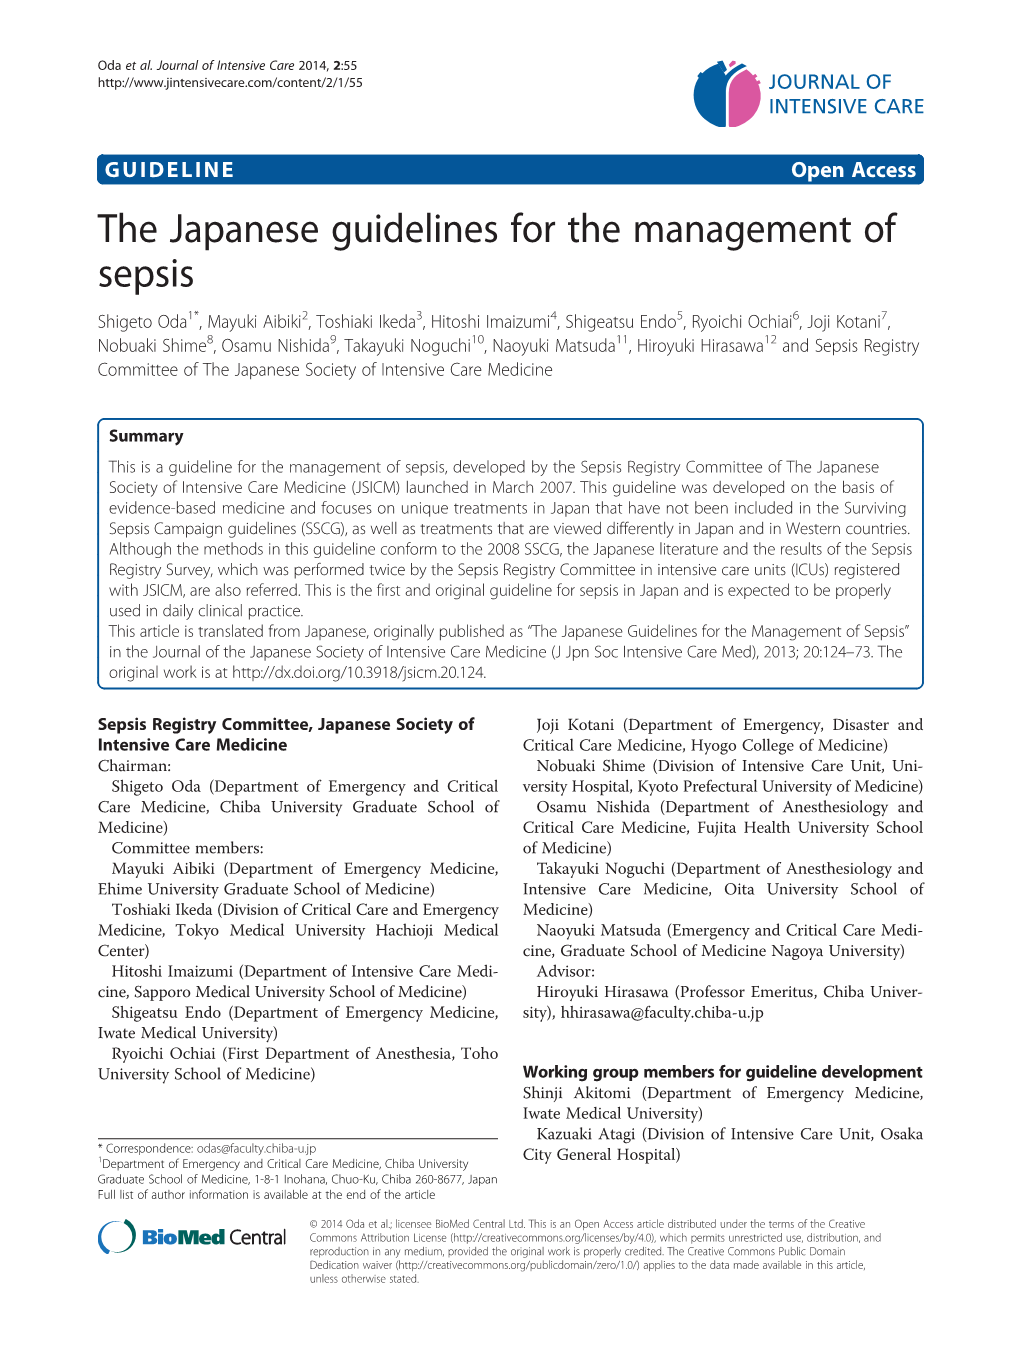 The Japanese Guidelines for the Management of Sepsis